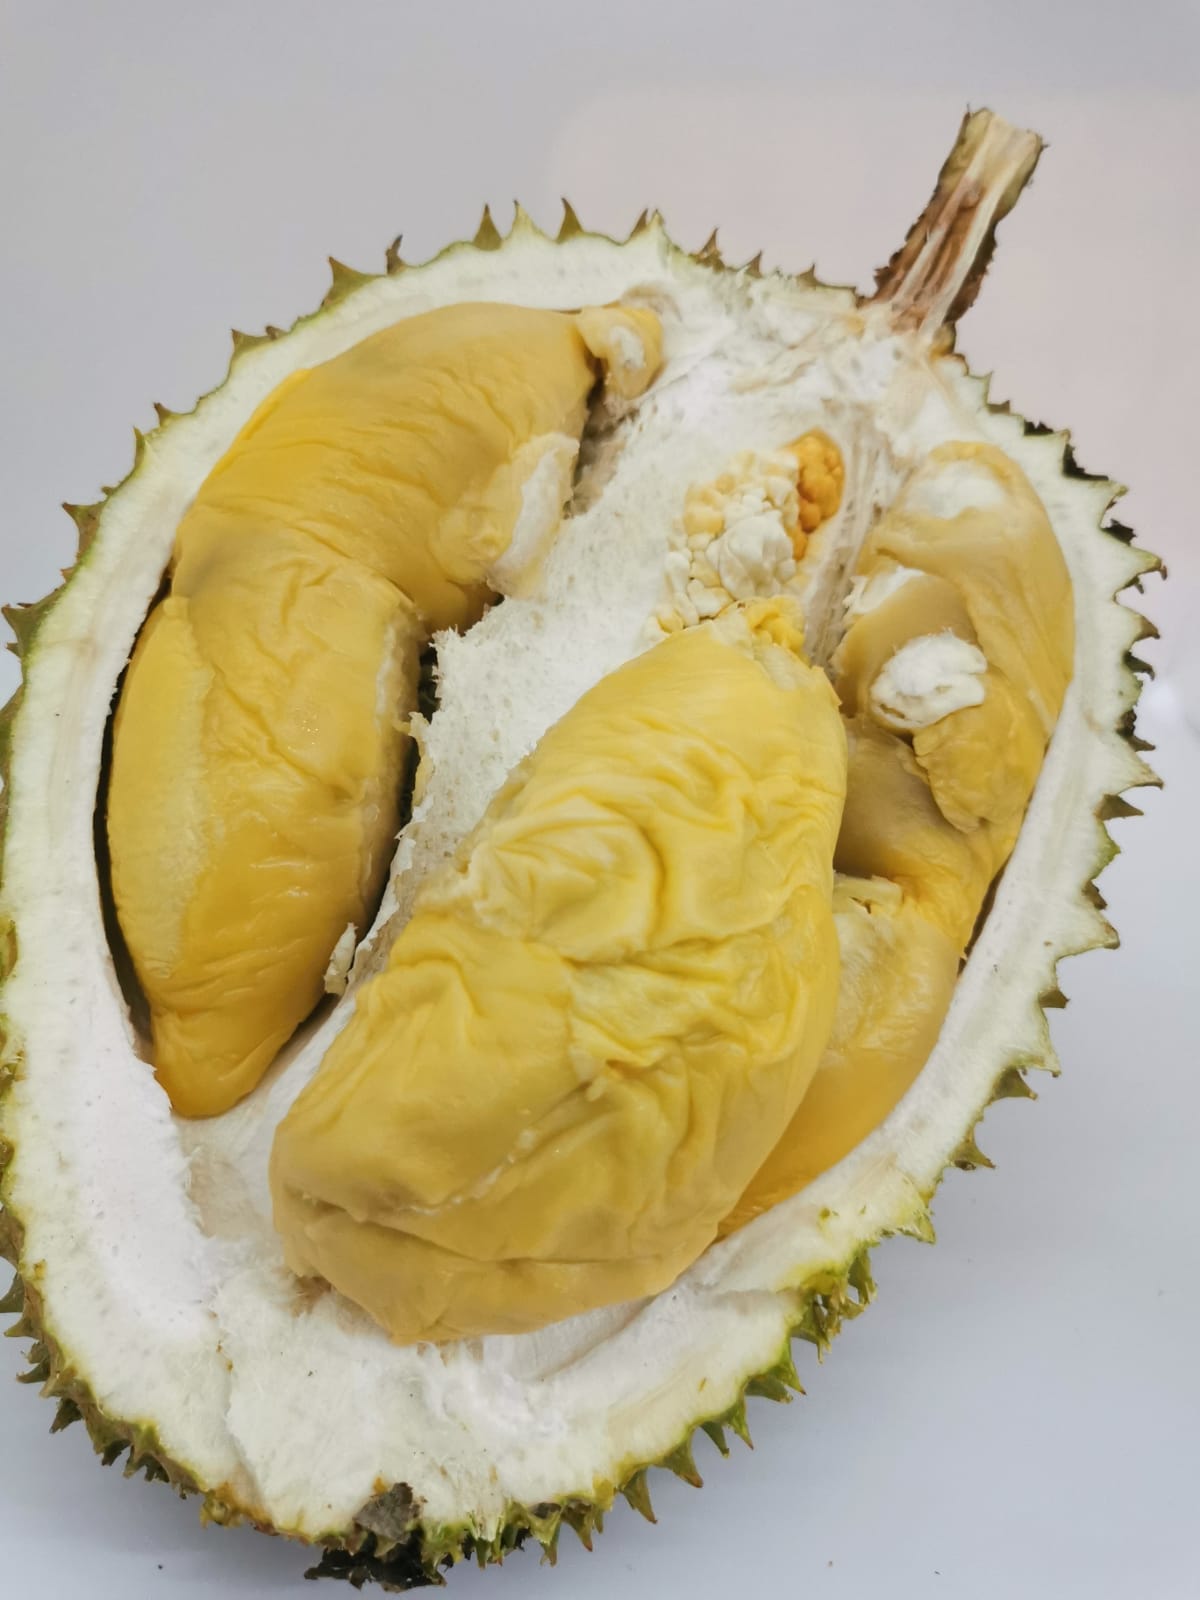 Tekka durian | durian express delivery